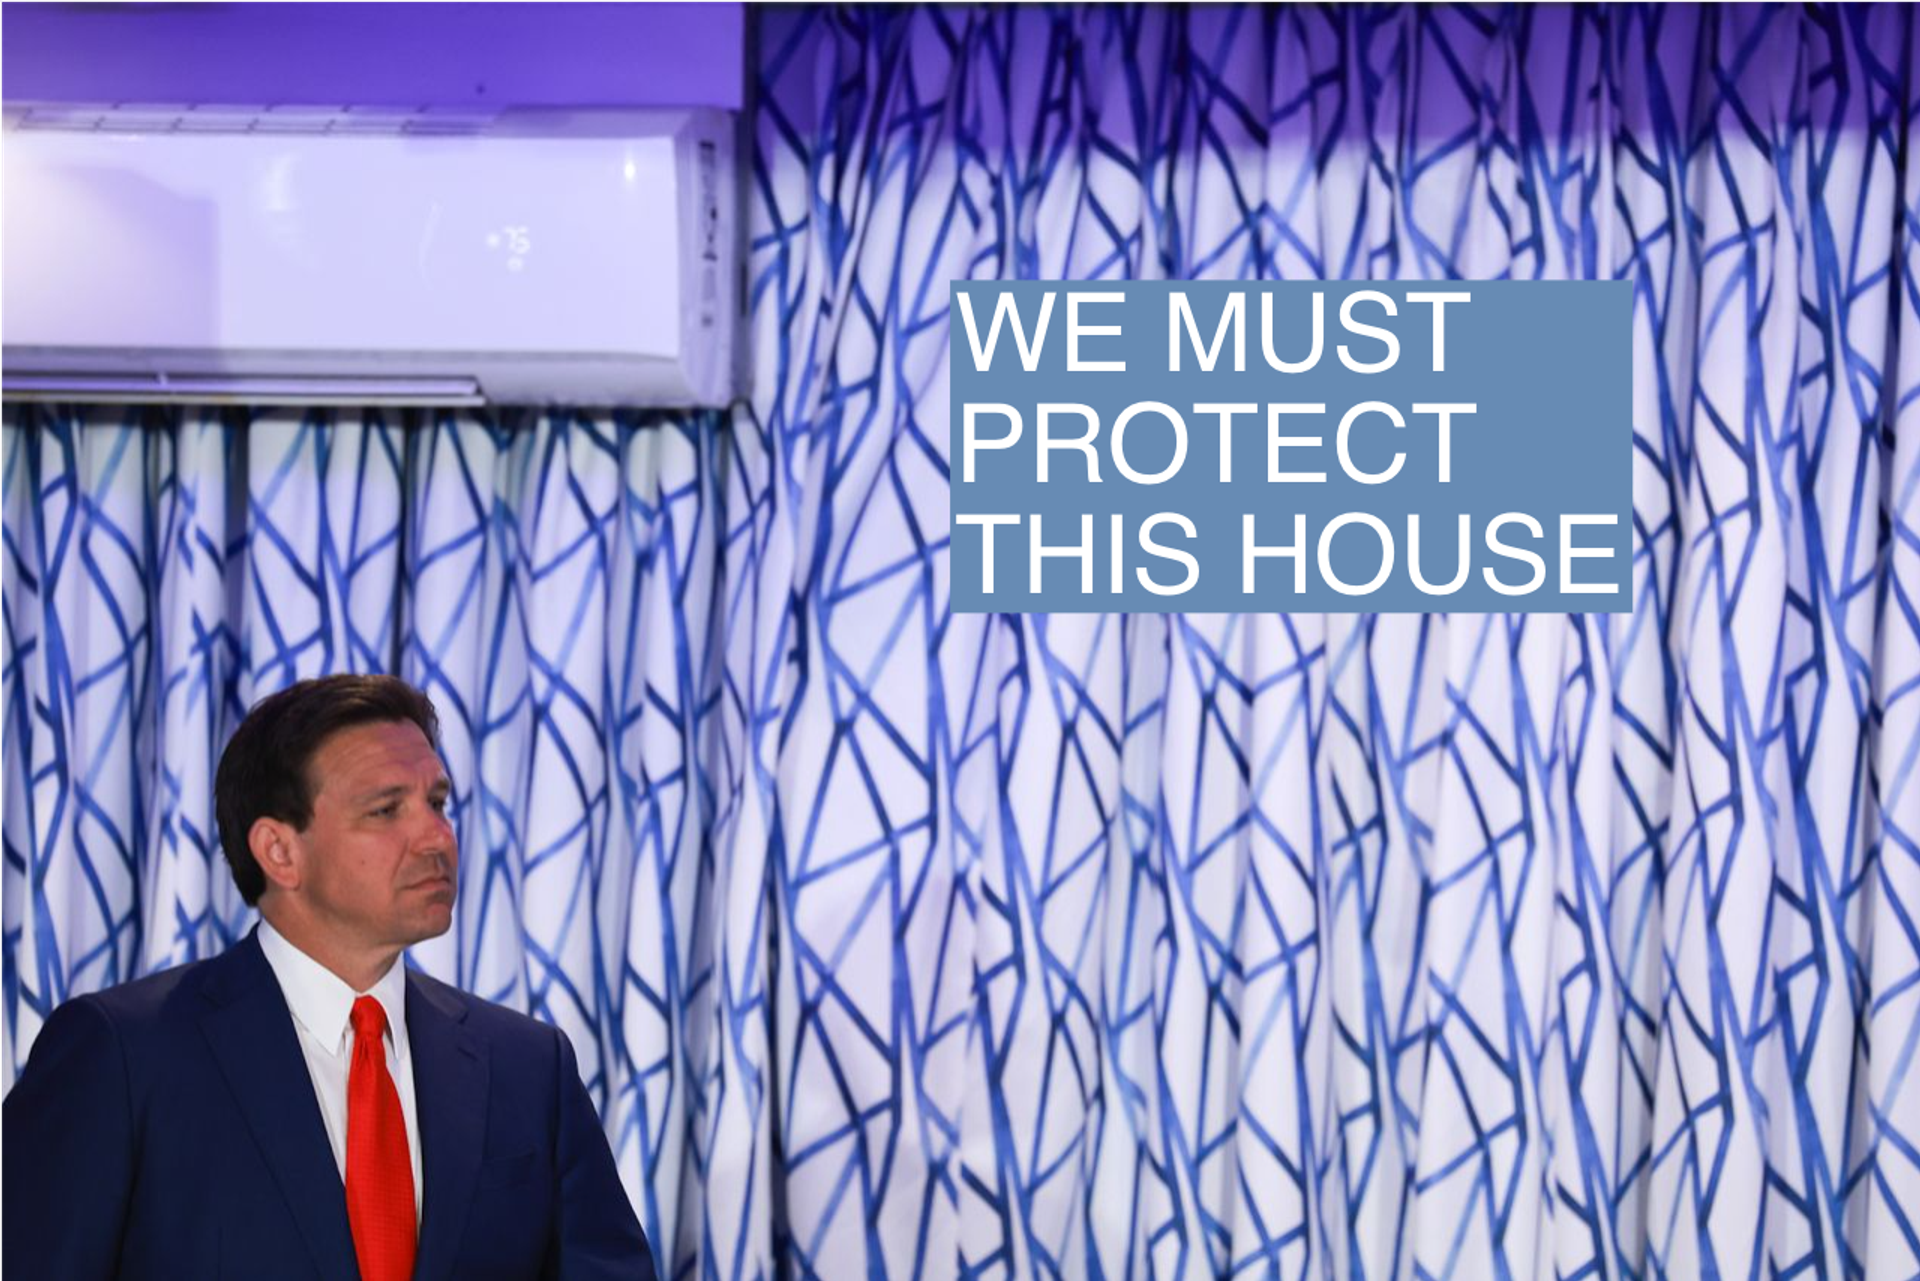 Florida Gov. Ron DeSantis during a news conference held at the Santorini by Georgios restaurant on March 20, 2024 in Miami Beach, Florida.